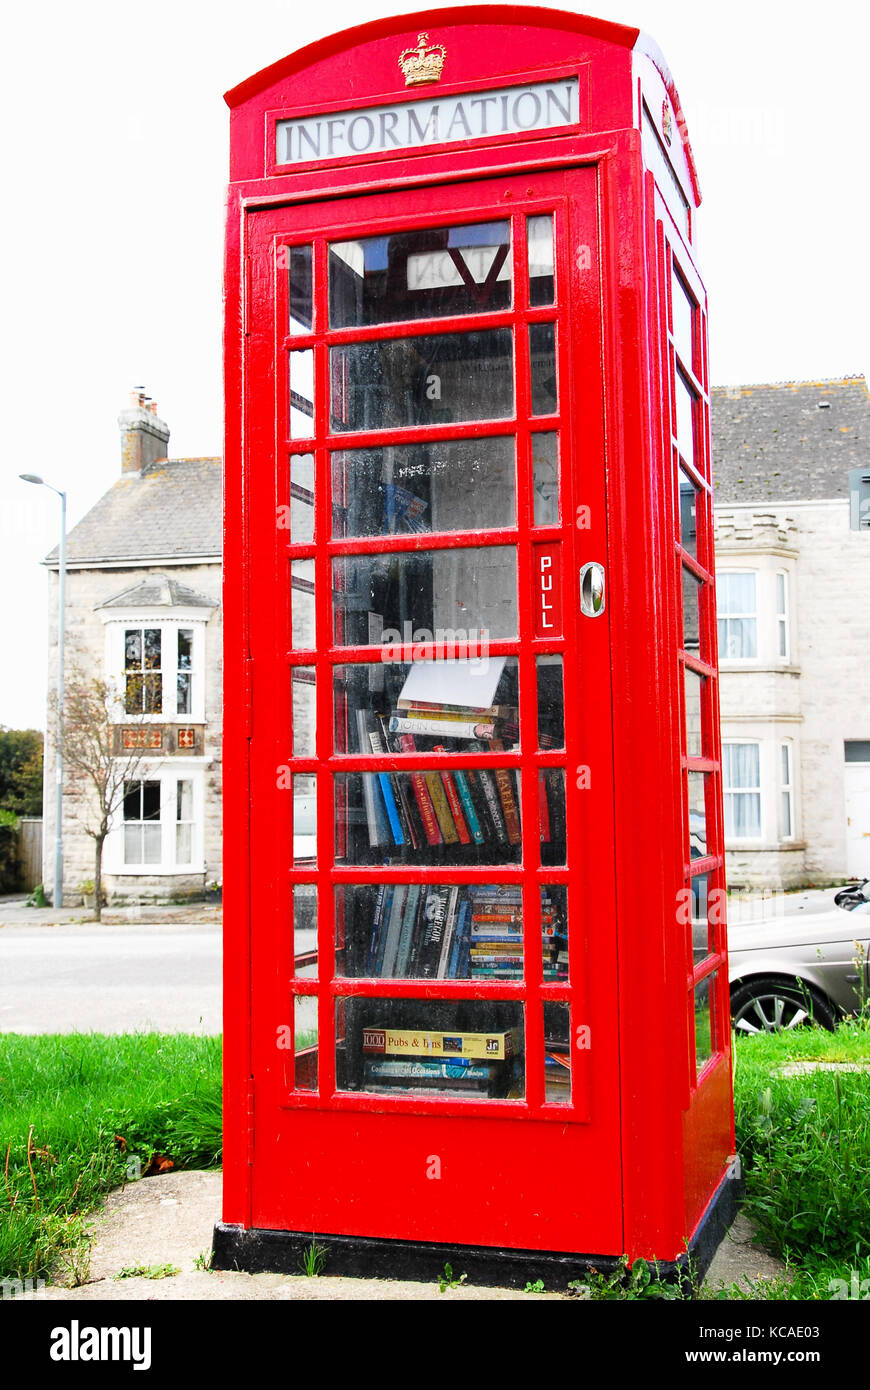 Wakeham, Dorset, UK. 3rd October 2017 - The former GPO telephone kiosk in Wakeham, Isle of Portland, which has been converted into what could possibly be the world's smallest tourist information office. Faced with its removal, residents clubbed together to buy it and have just sealed the deal with a fresh coat of shiny red paint! Credit: stuart fretwell/Alamy Live News Stock Photo